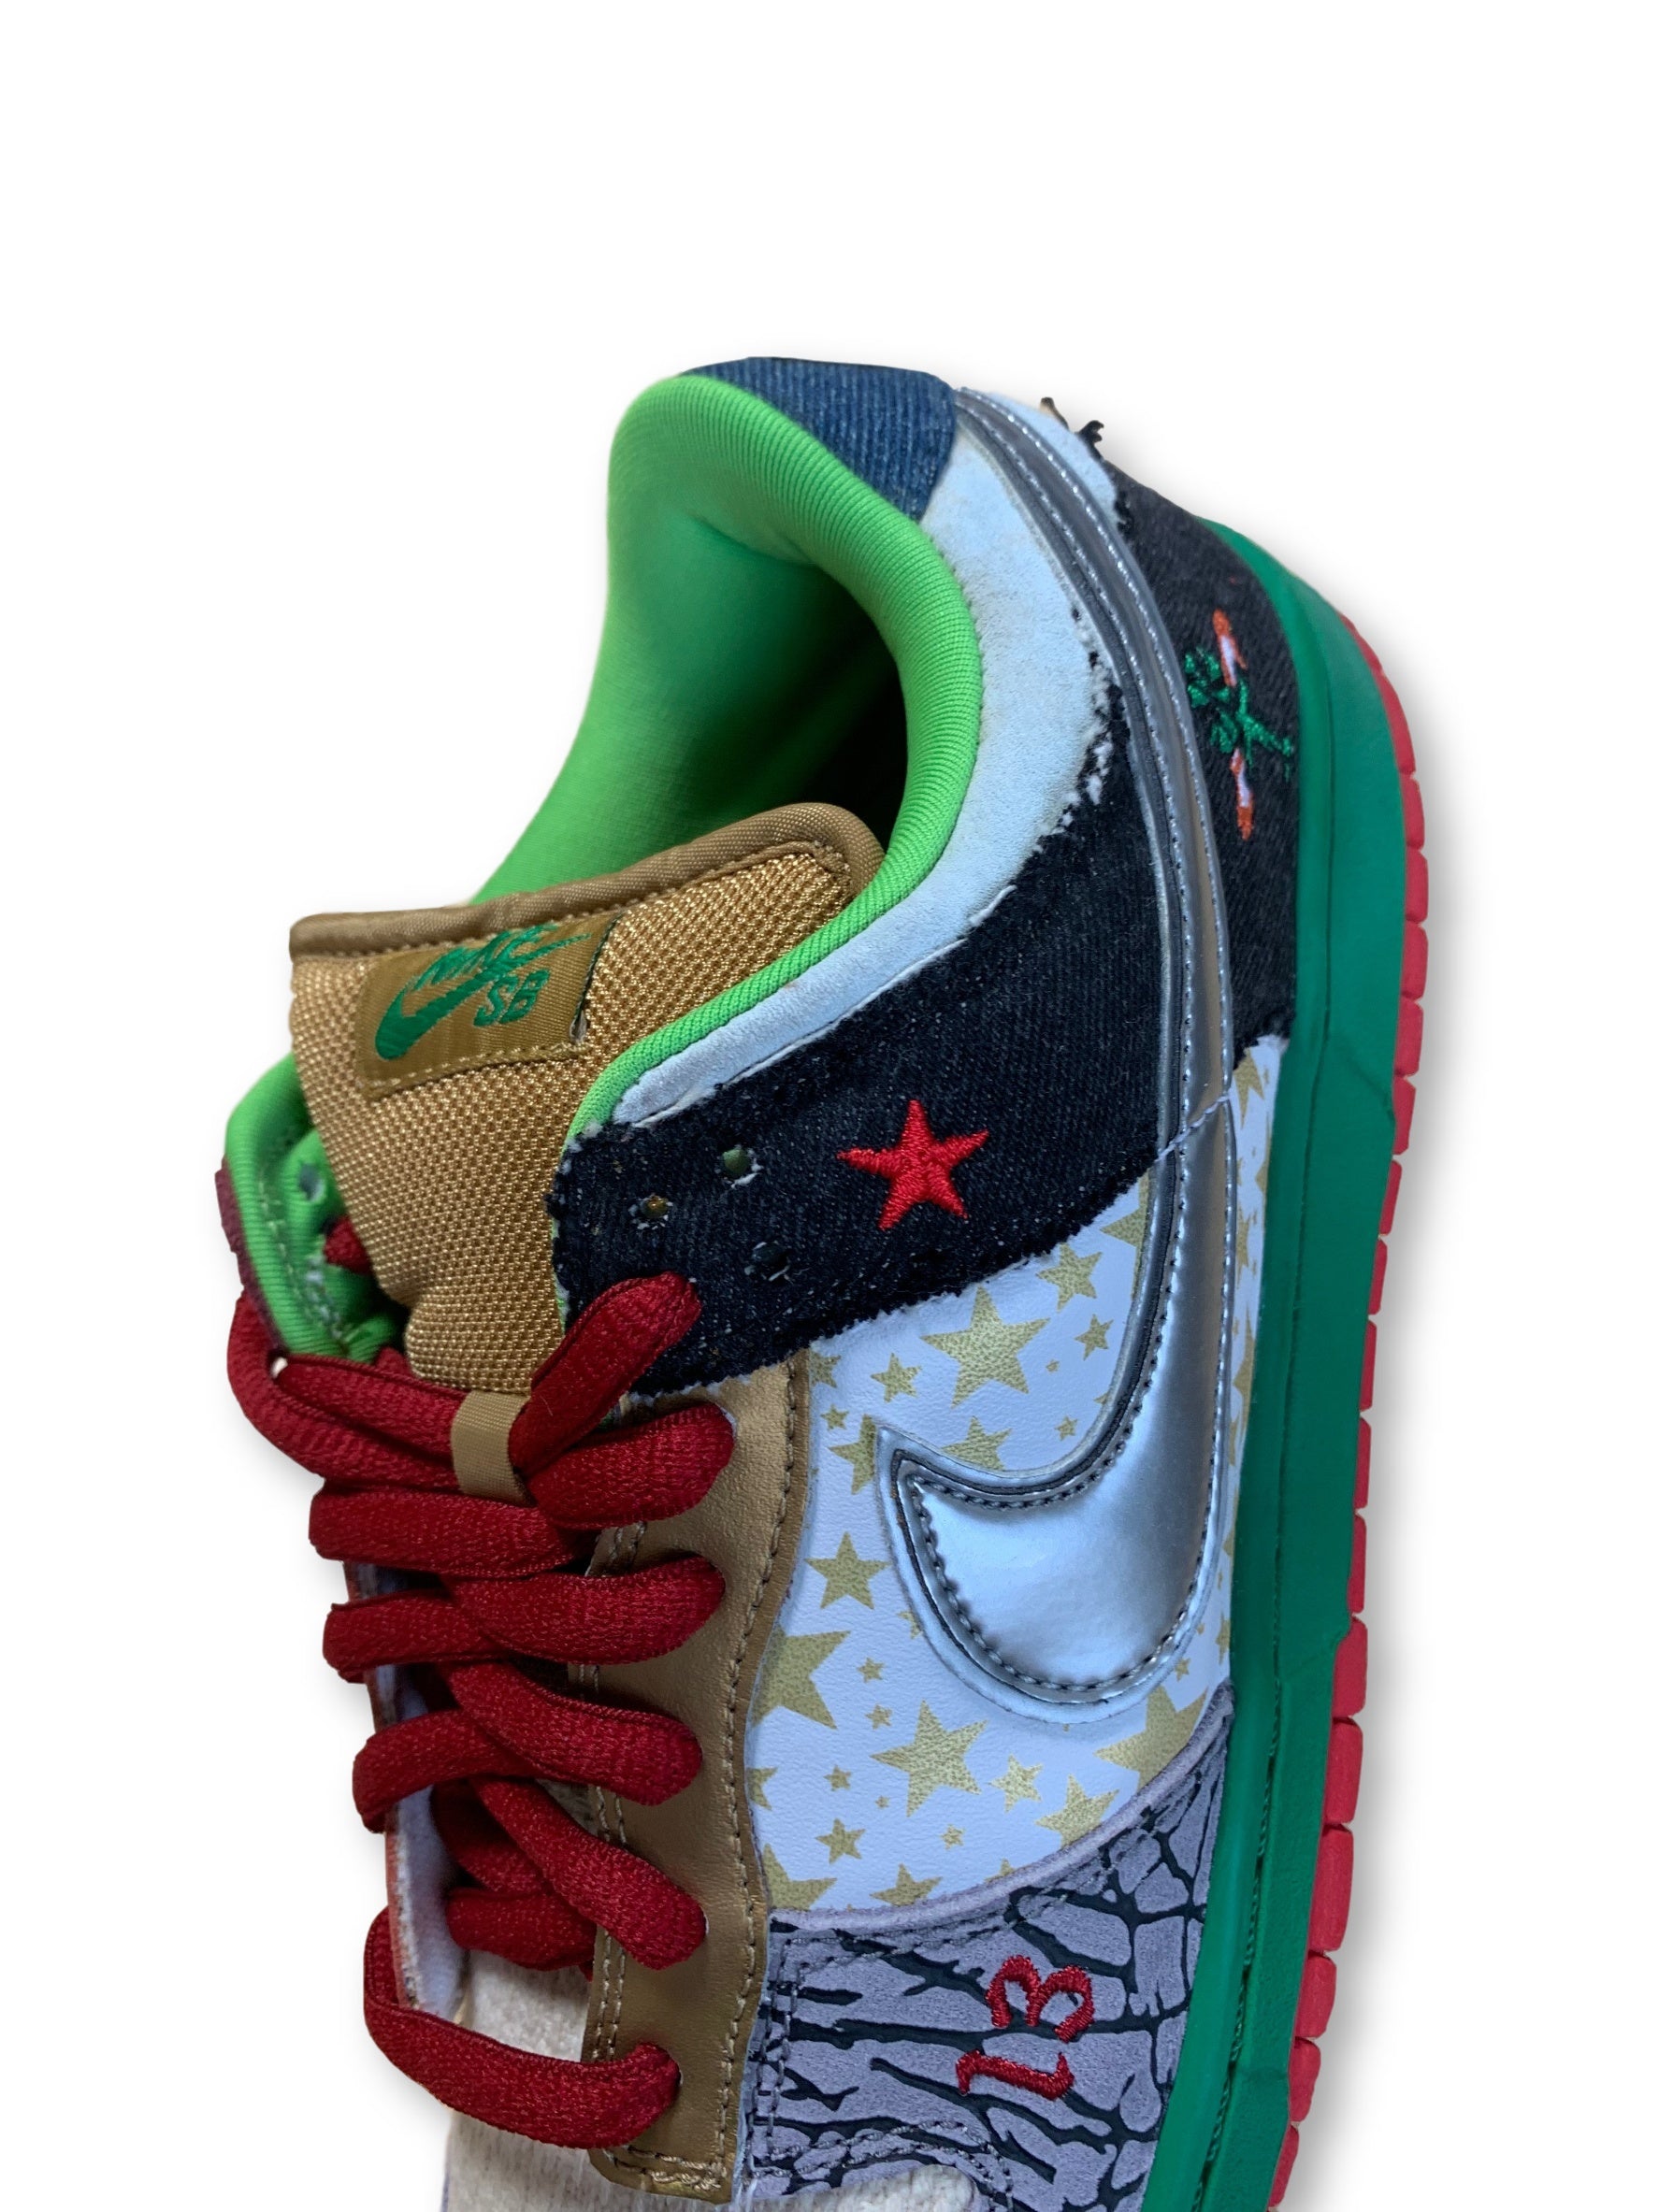 Nike Dunk Low Pro SB "What The Dunk" - Size 10 - NEW